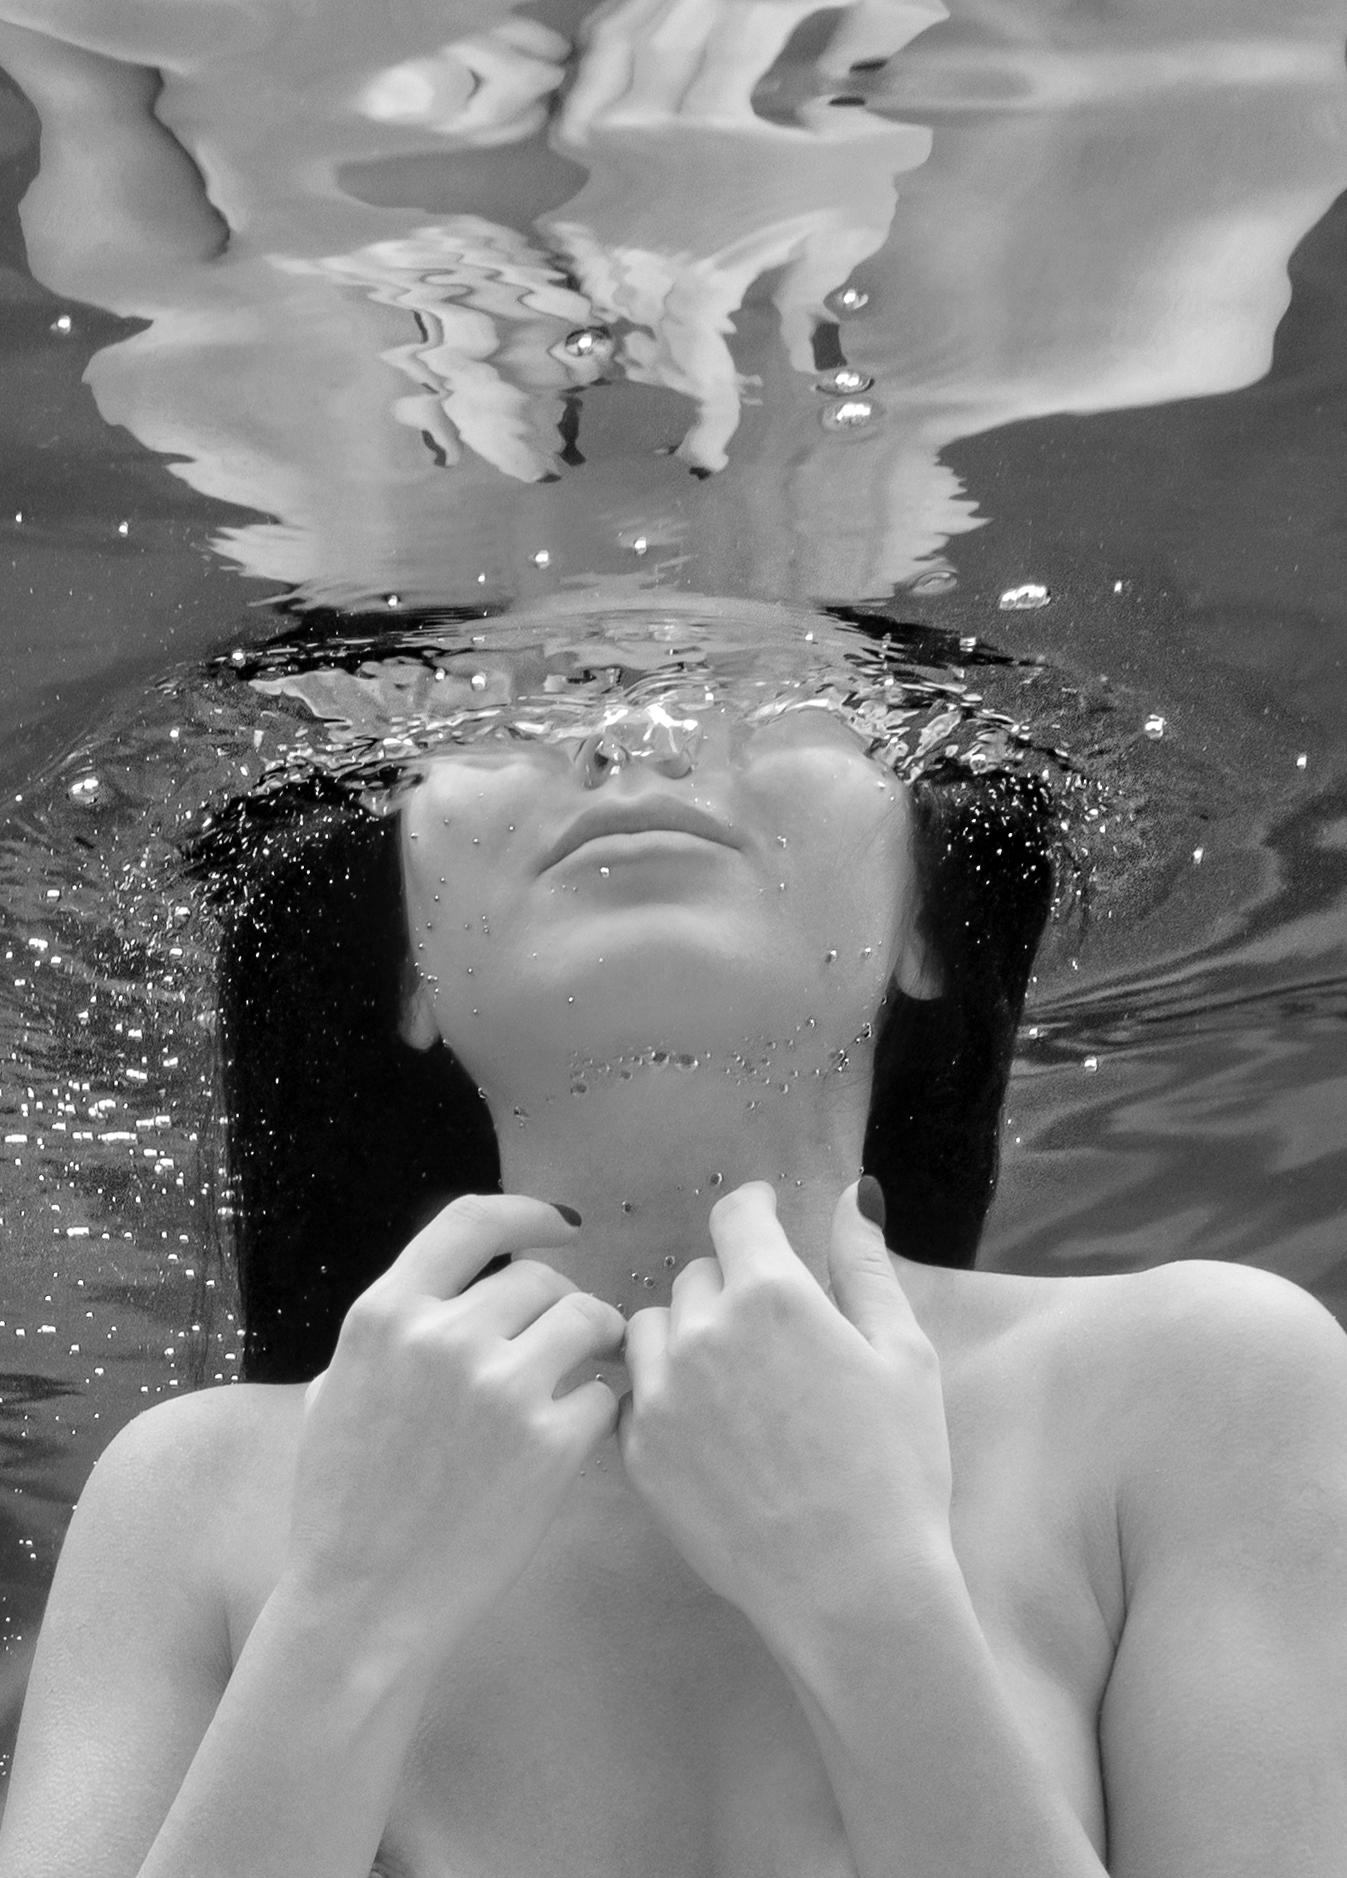 Alex Sher Nude Photograph - Praying Mermaid - underwater nude photograph - archival pigment print 23" x 17"